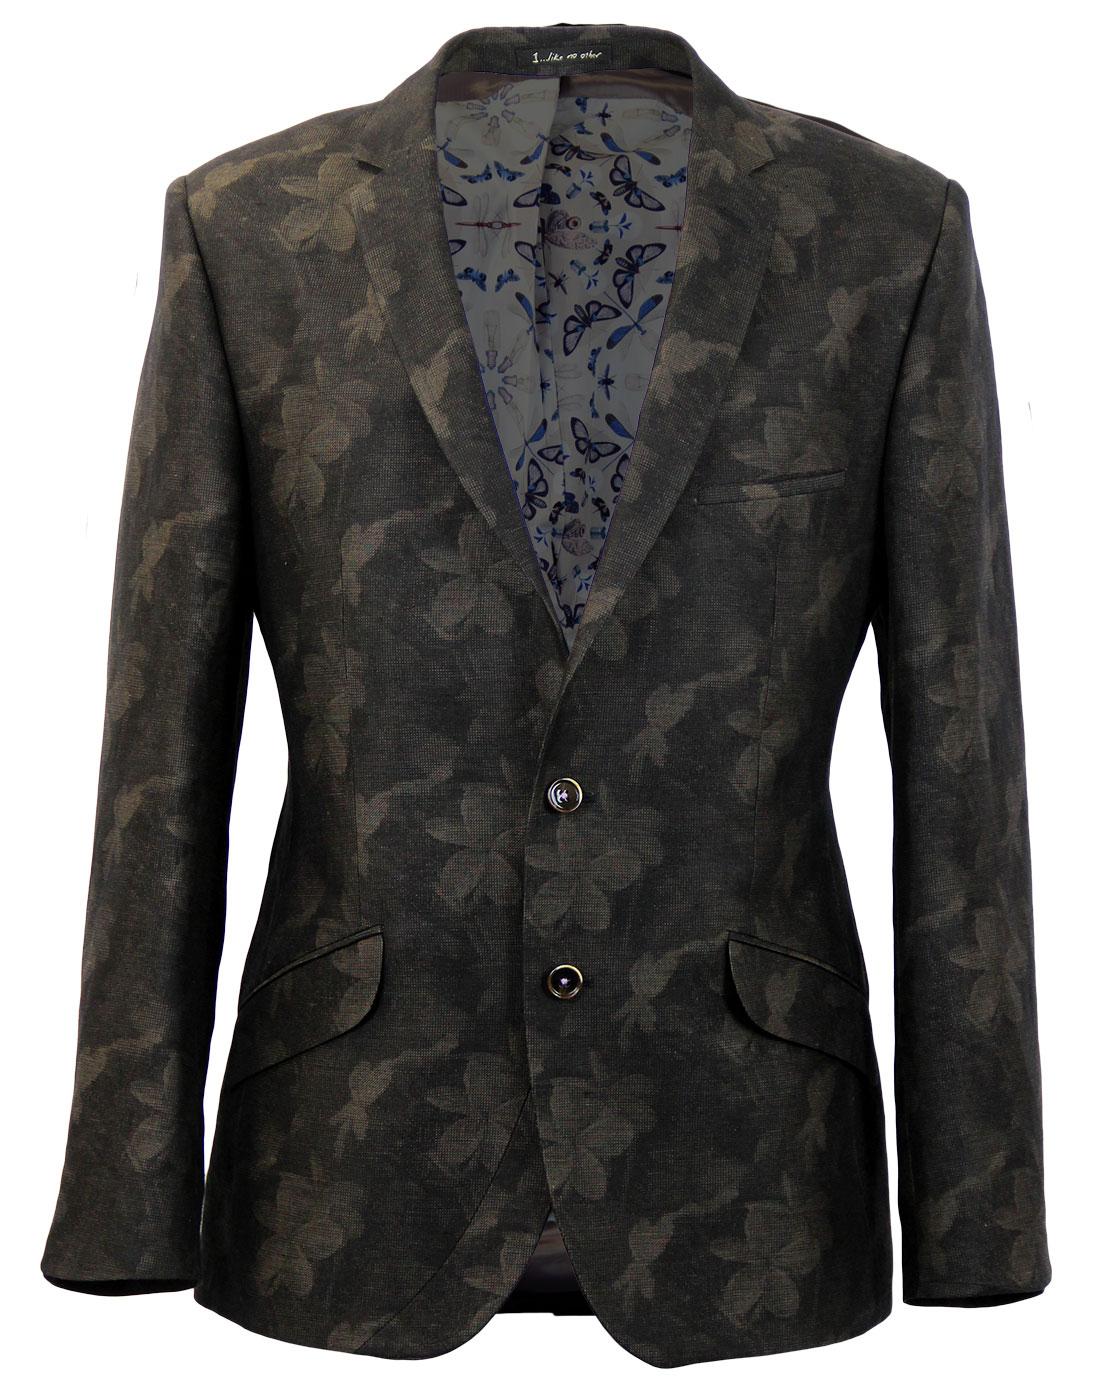 Remigium 1 LIKE NO OTHER Mod Floral Weave Blazer